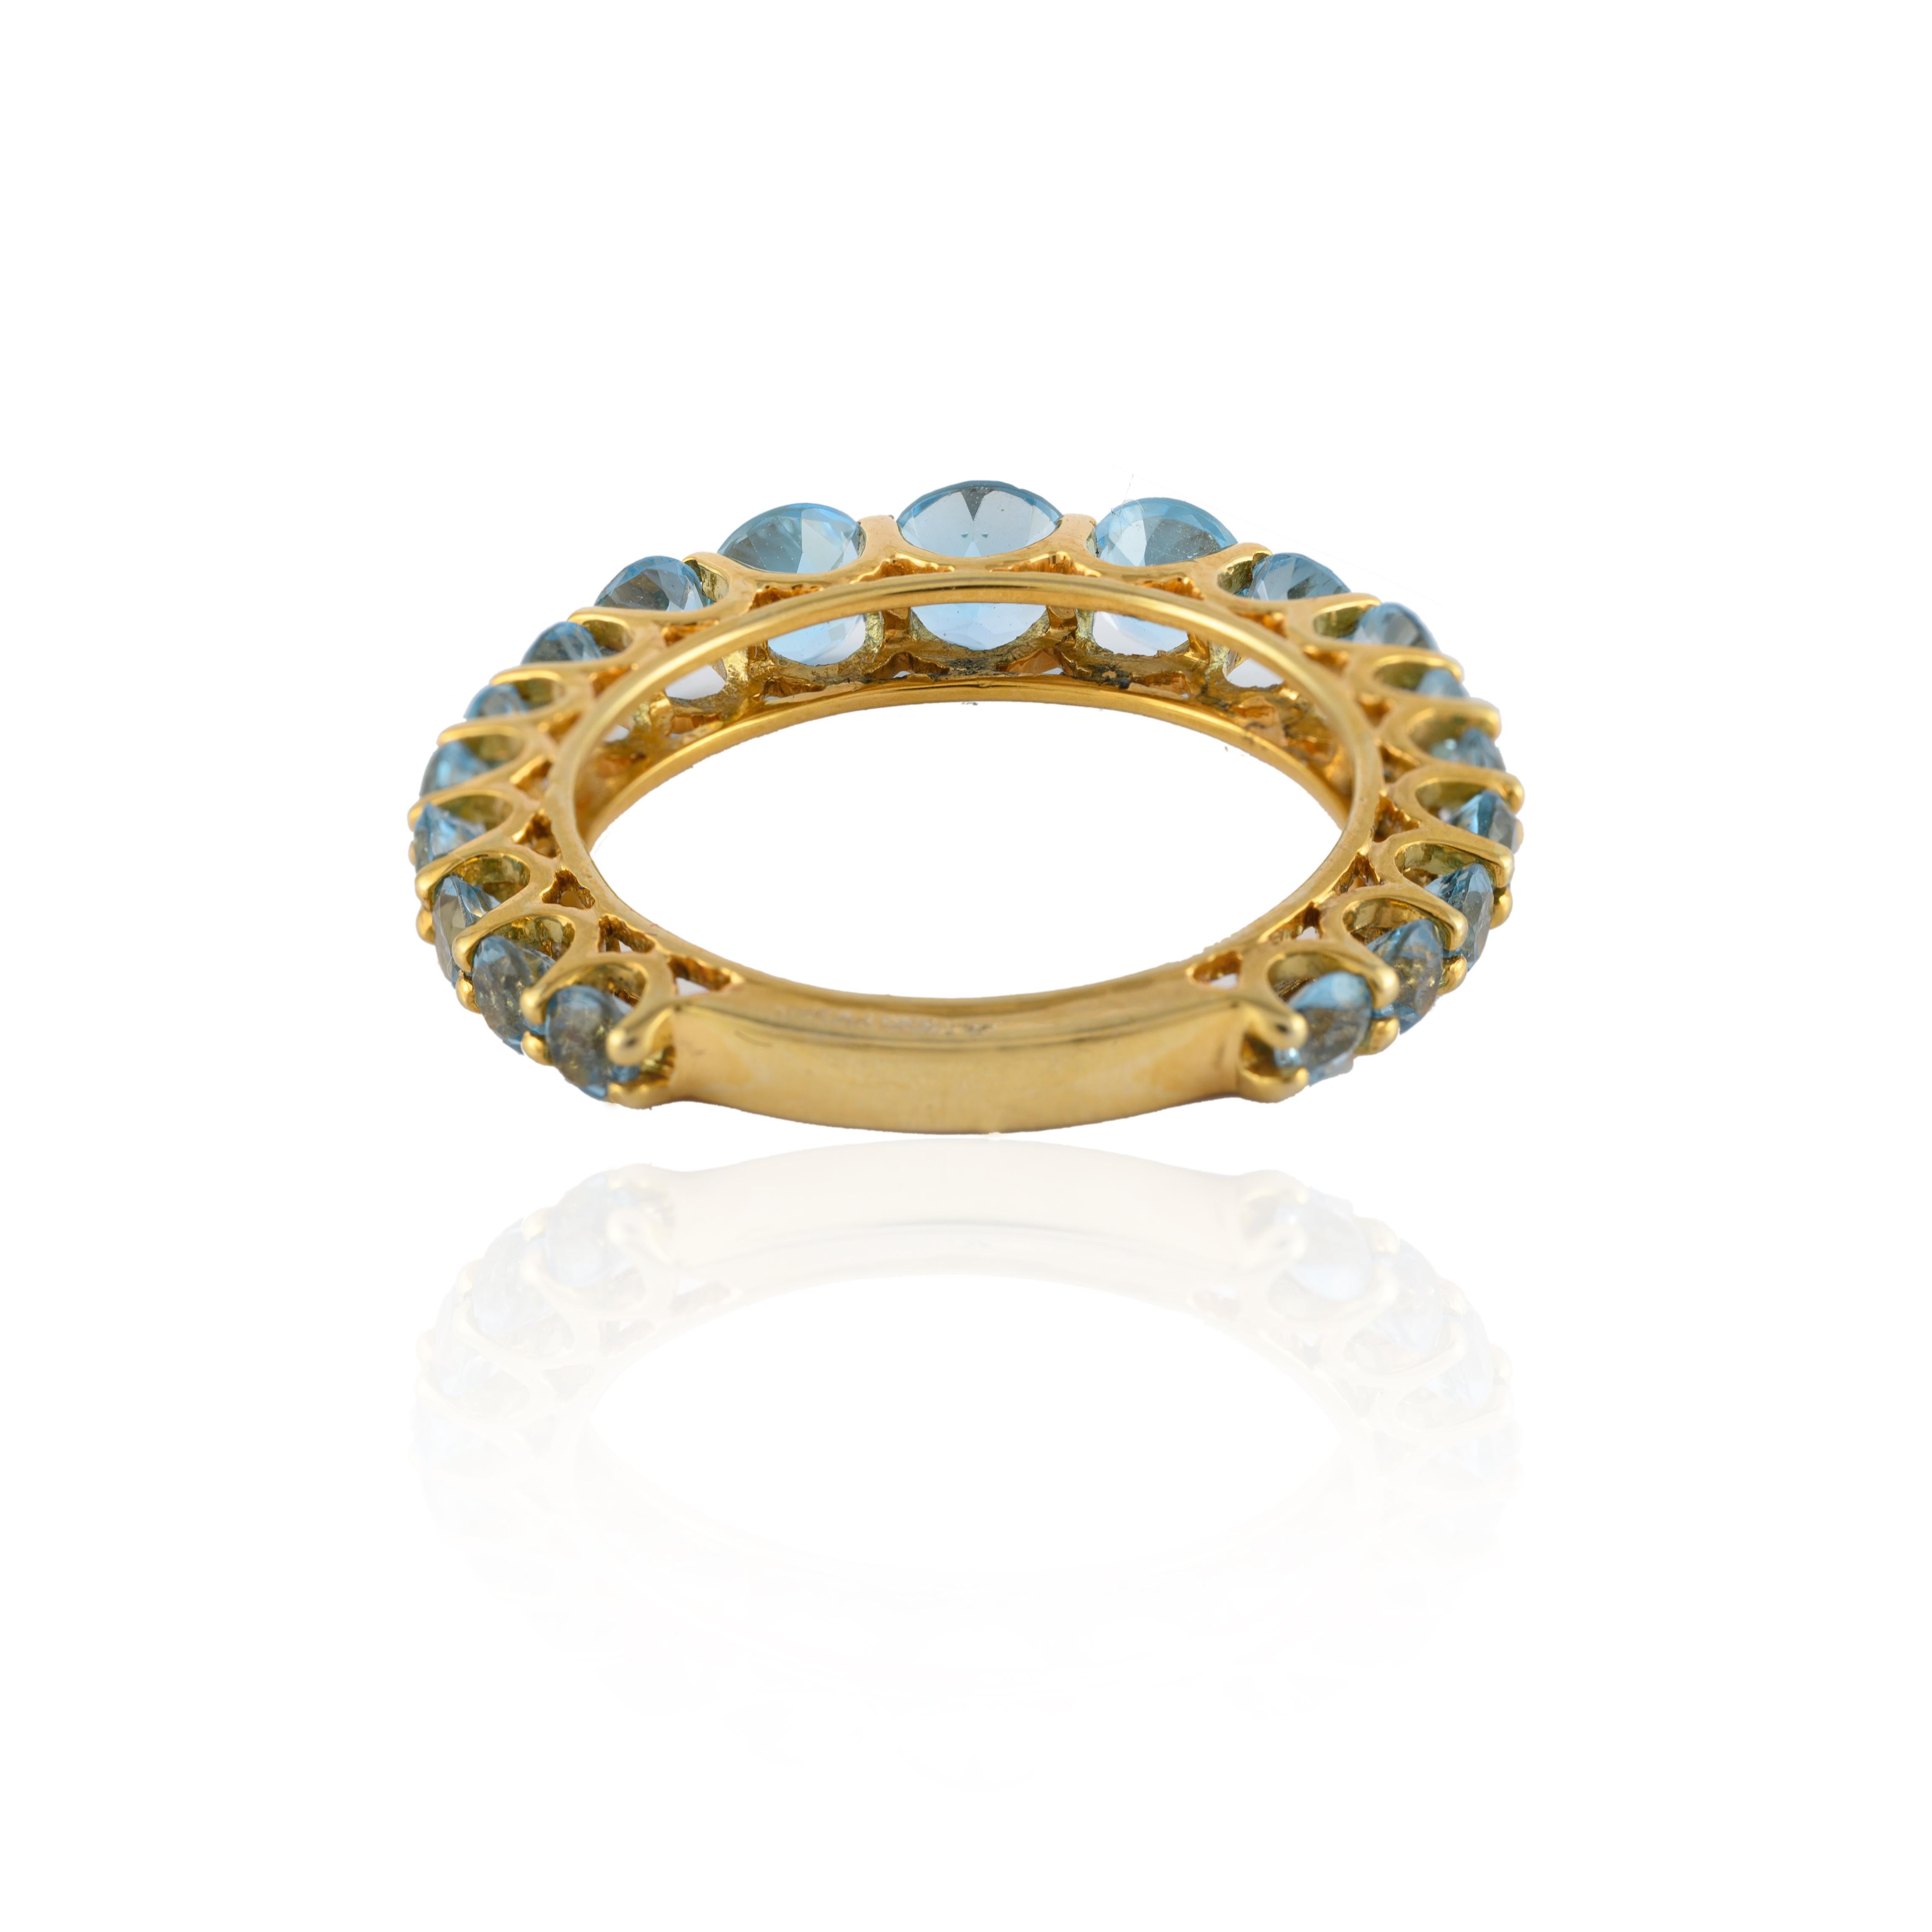 For Sale:  Unique 14k Yellow Gold 3.09 Carat Blue Topaz Half Eternity Band Ring 4